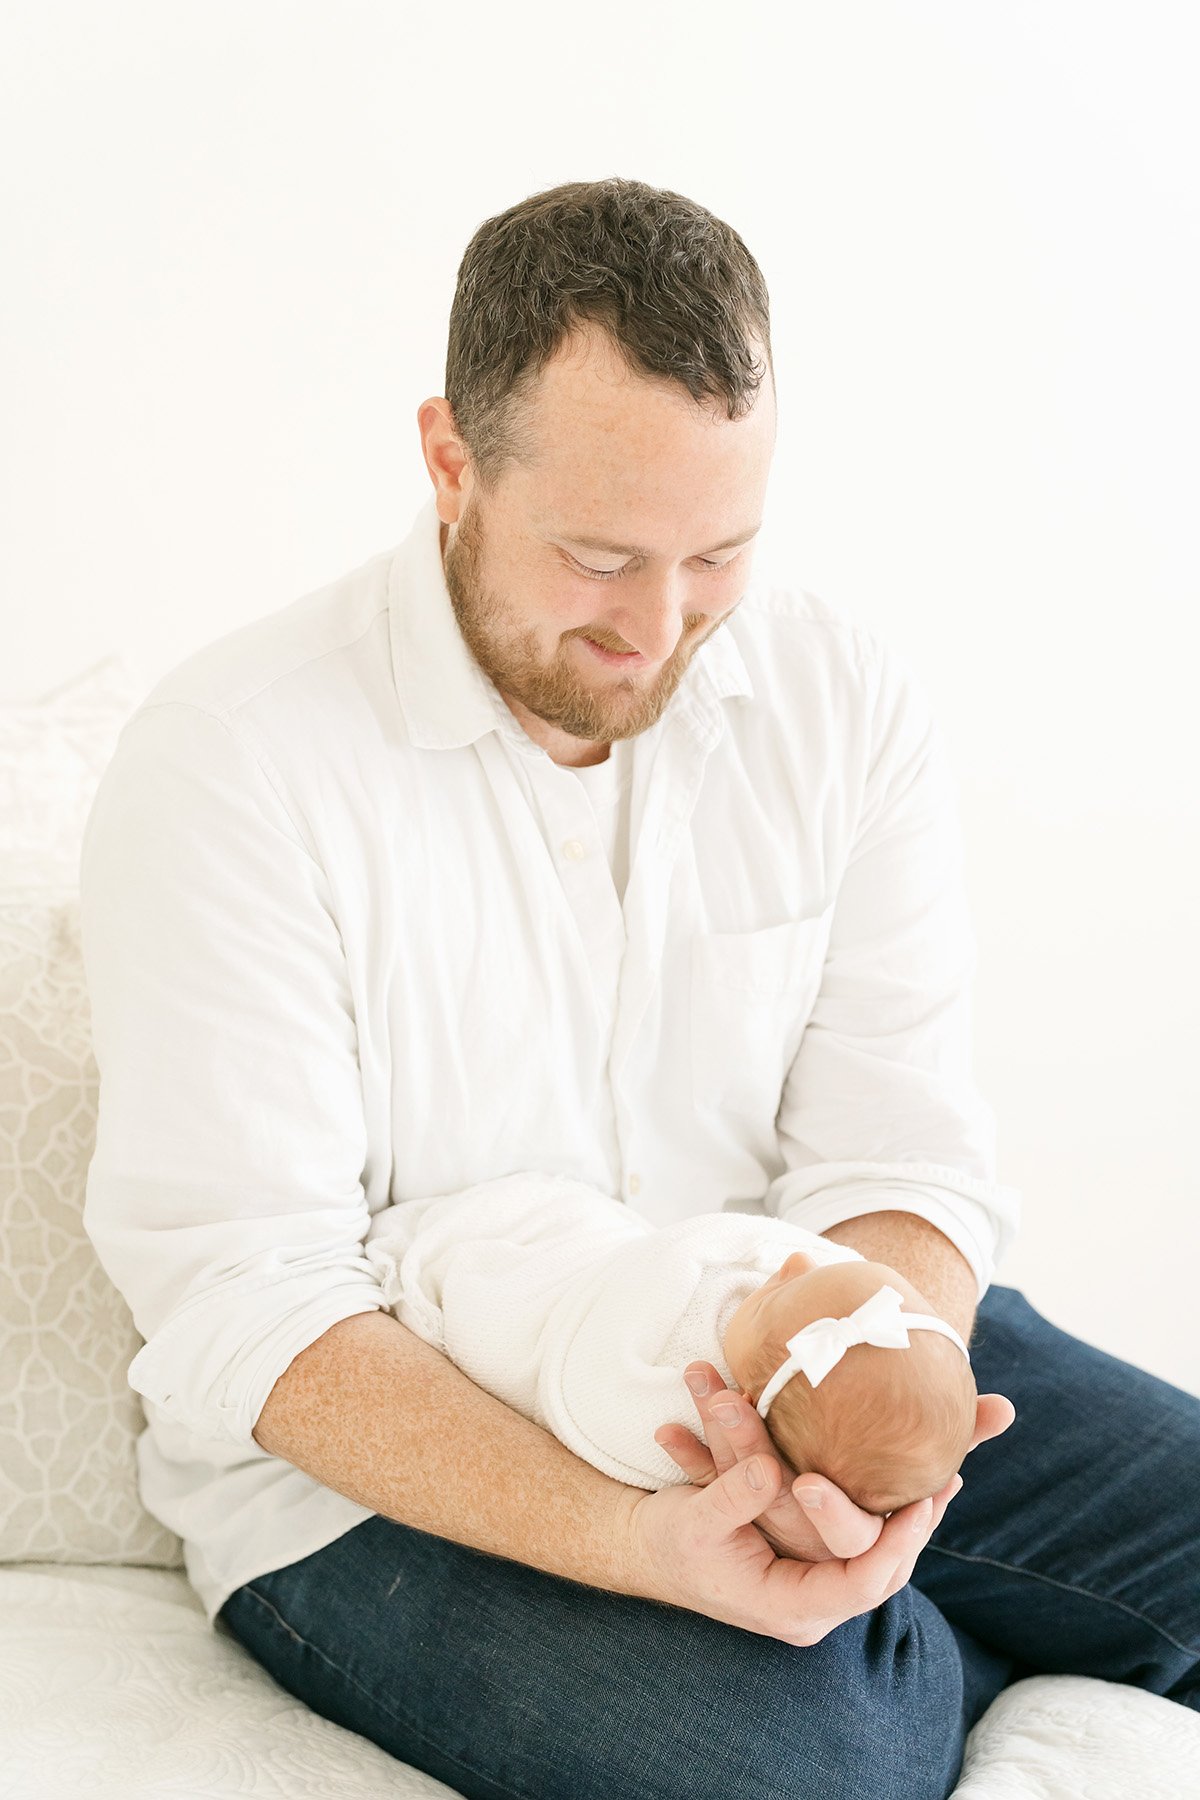 Louisville-ky-dad-smiles-at-newborn-during-photo-shoot